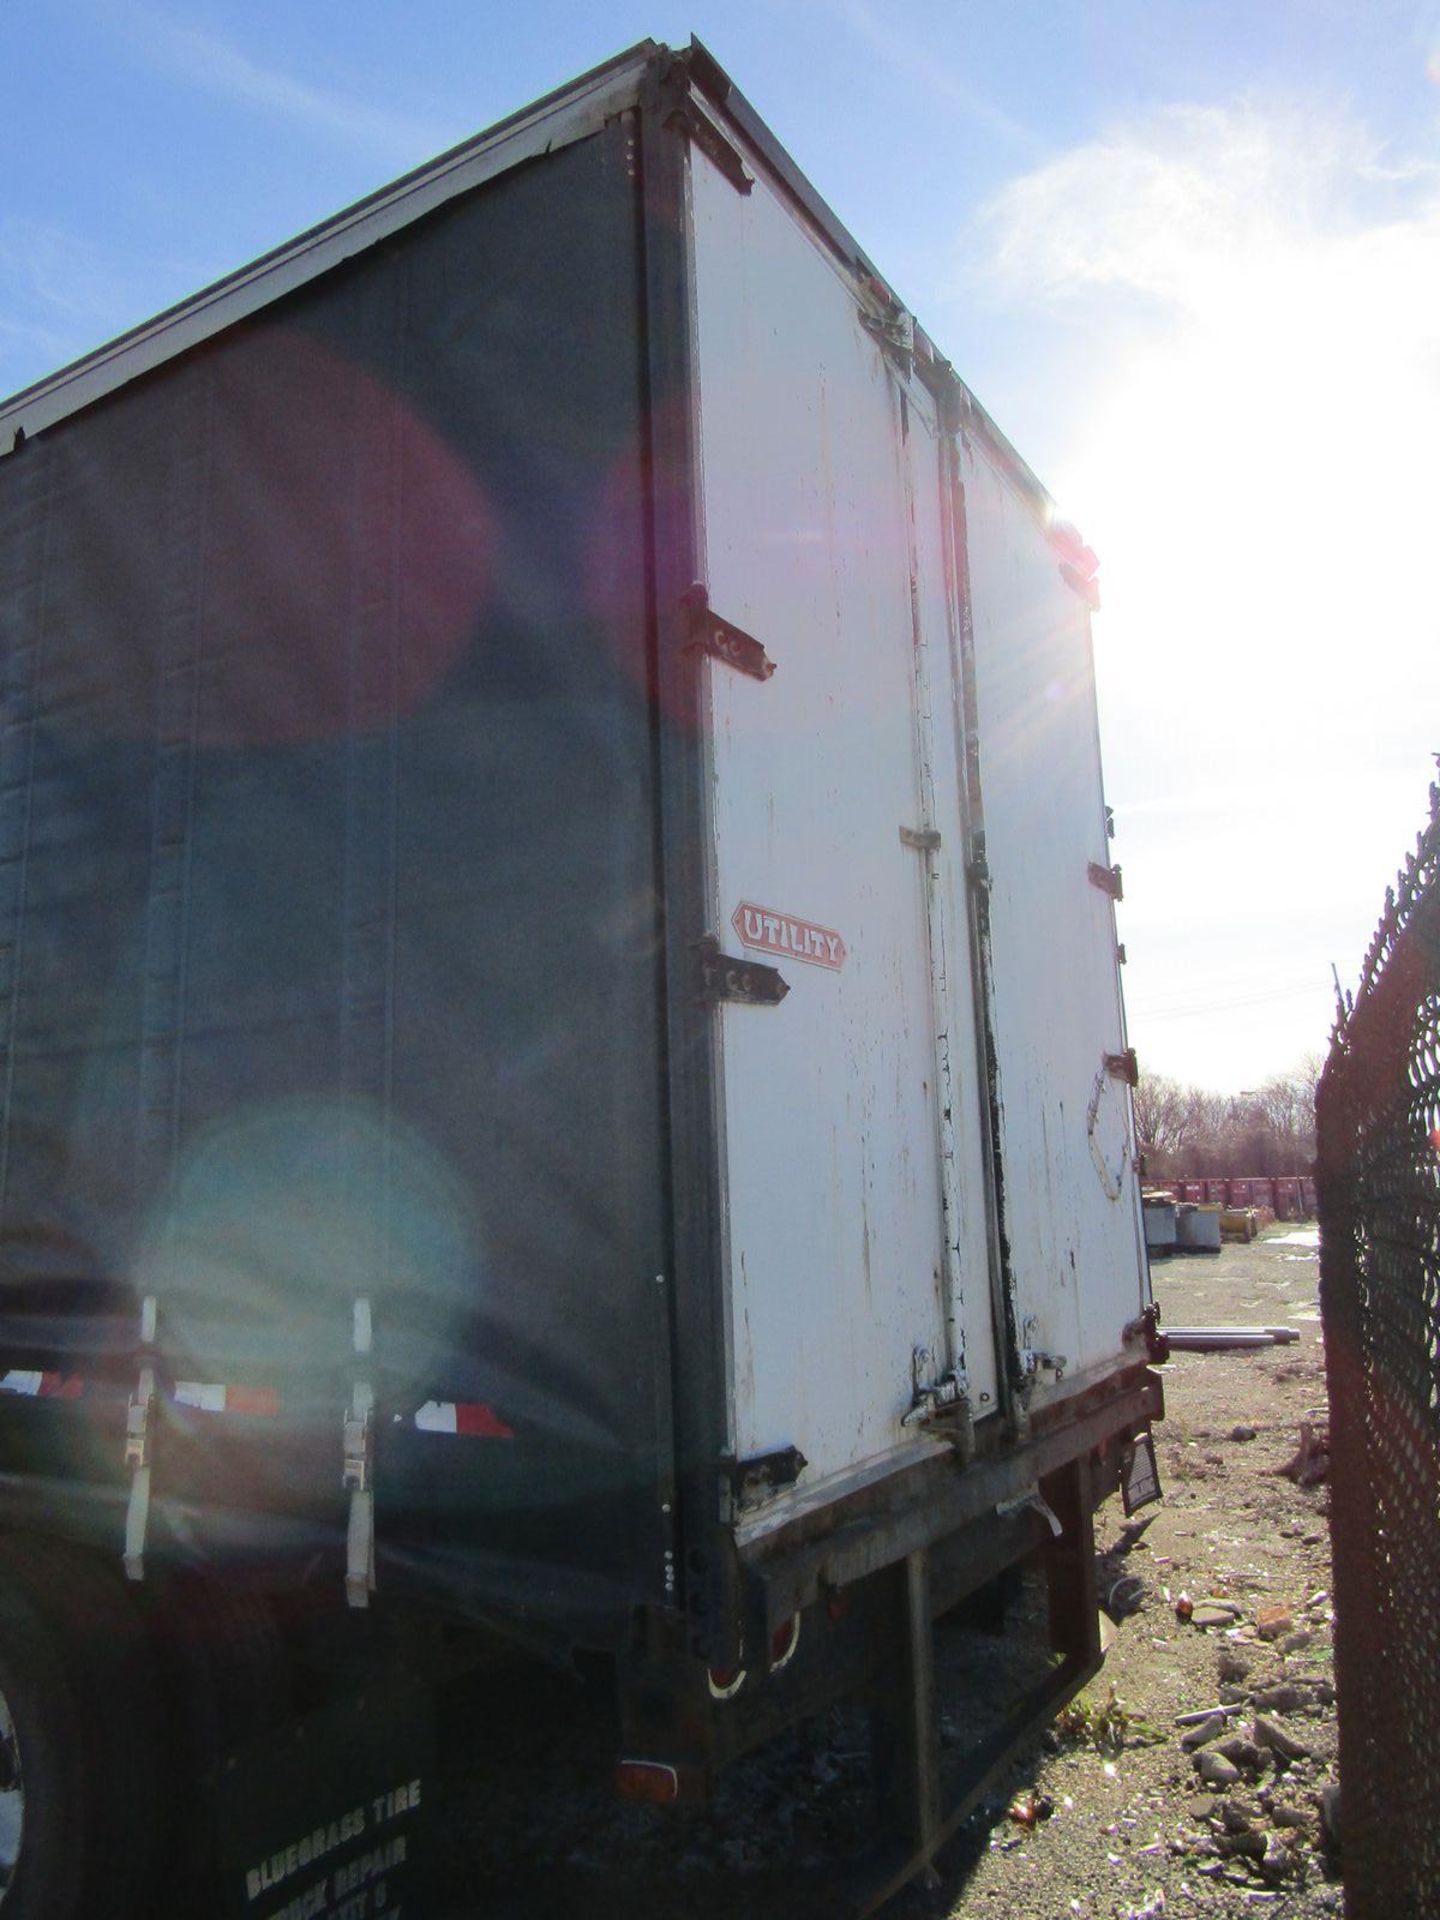 Utility 48 ft. Model TS2CHE Tautliner Tandem Axle Curtain Side Semi-Trailer, VIN: 1UYTS2488 MA5821 - Image 3 of 7